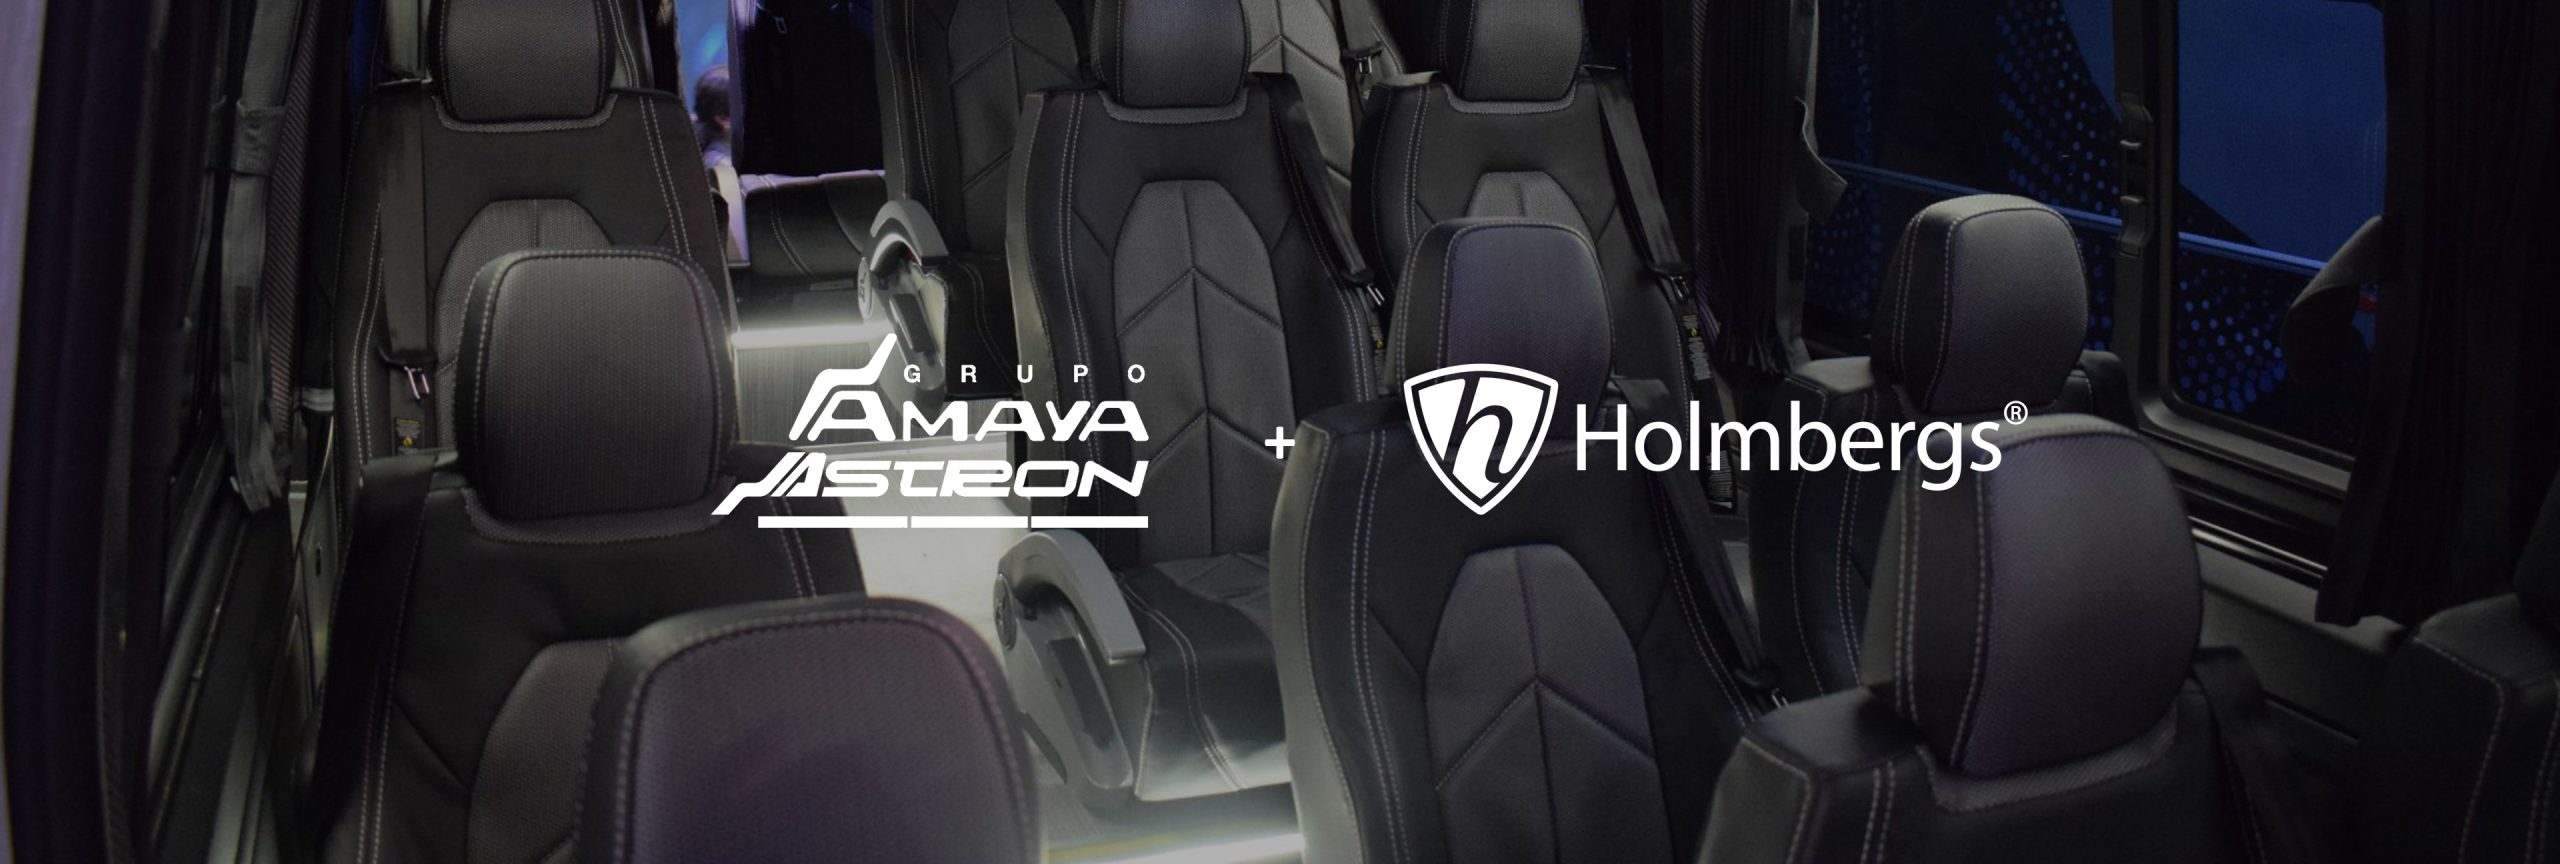 Amaya Aston partnering with Holmbergs safety systems